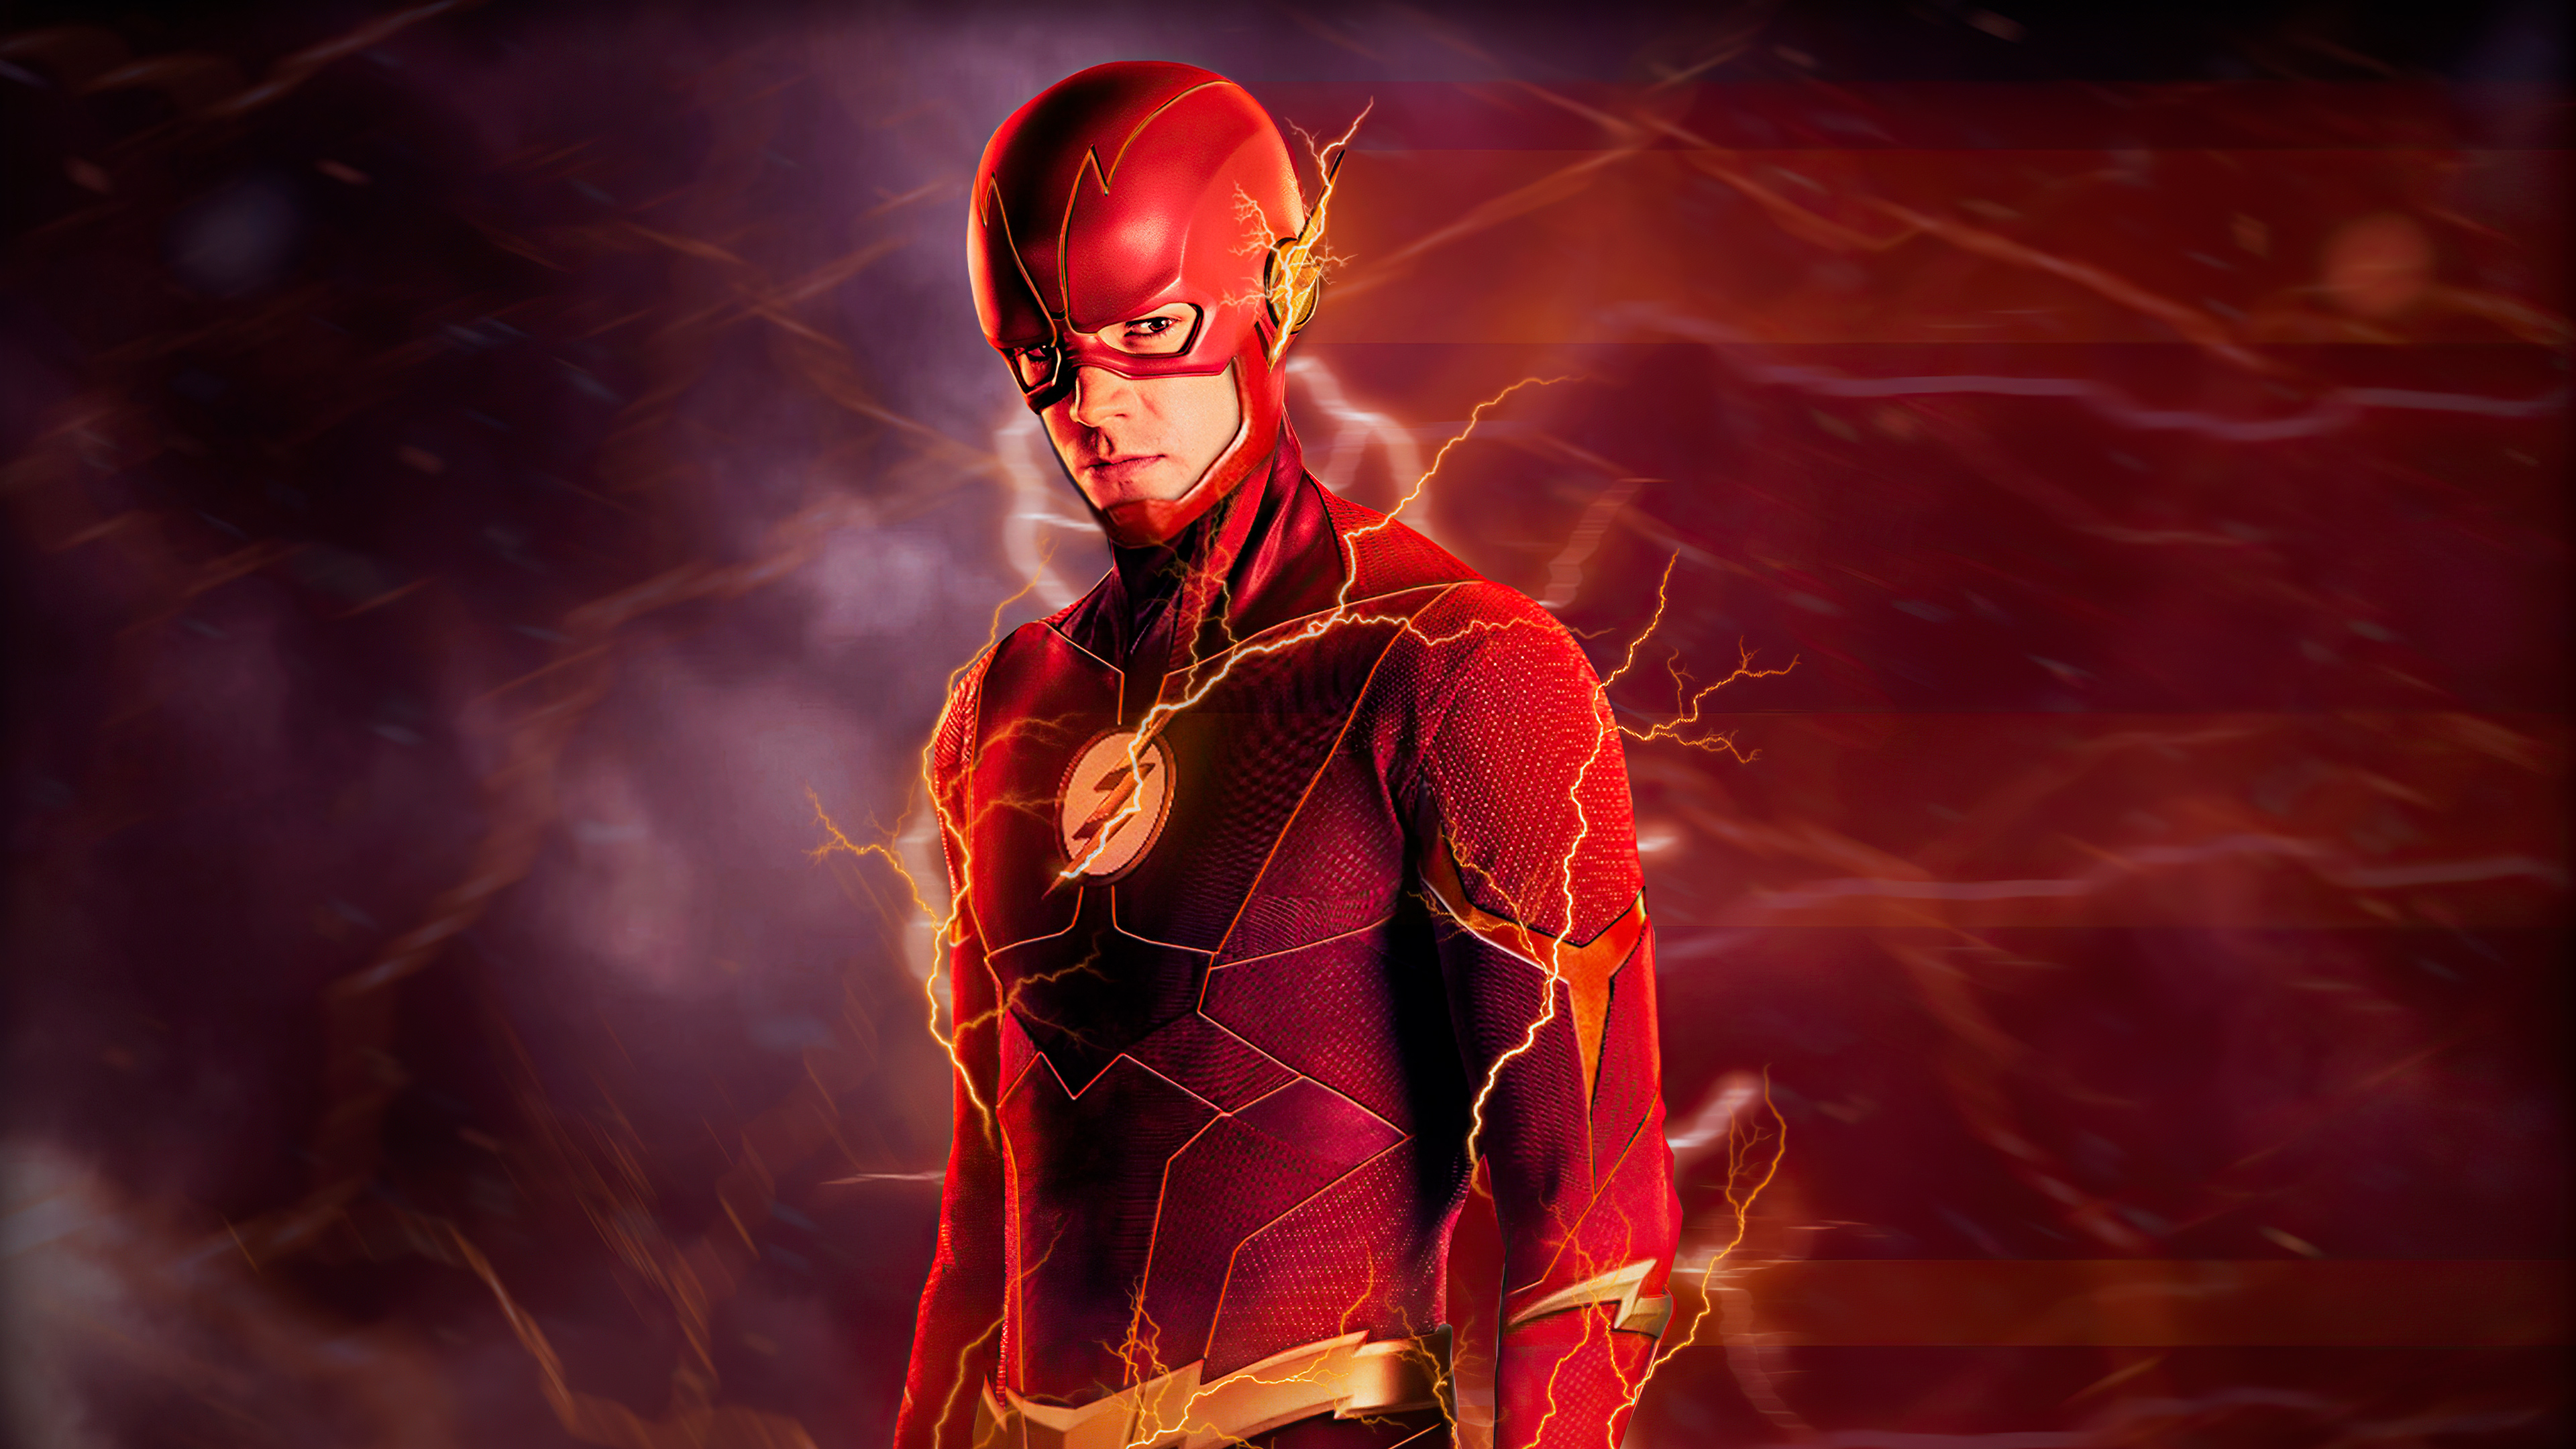 3840x2160 2560x1440 The Lightning Flash 4k 1440P Resolution HD 4k Wallpapers, Images, Backgrounds, Photos and Pictures